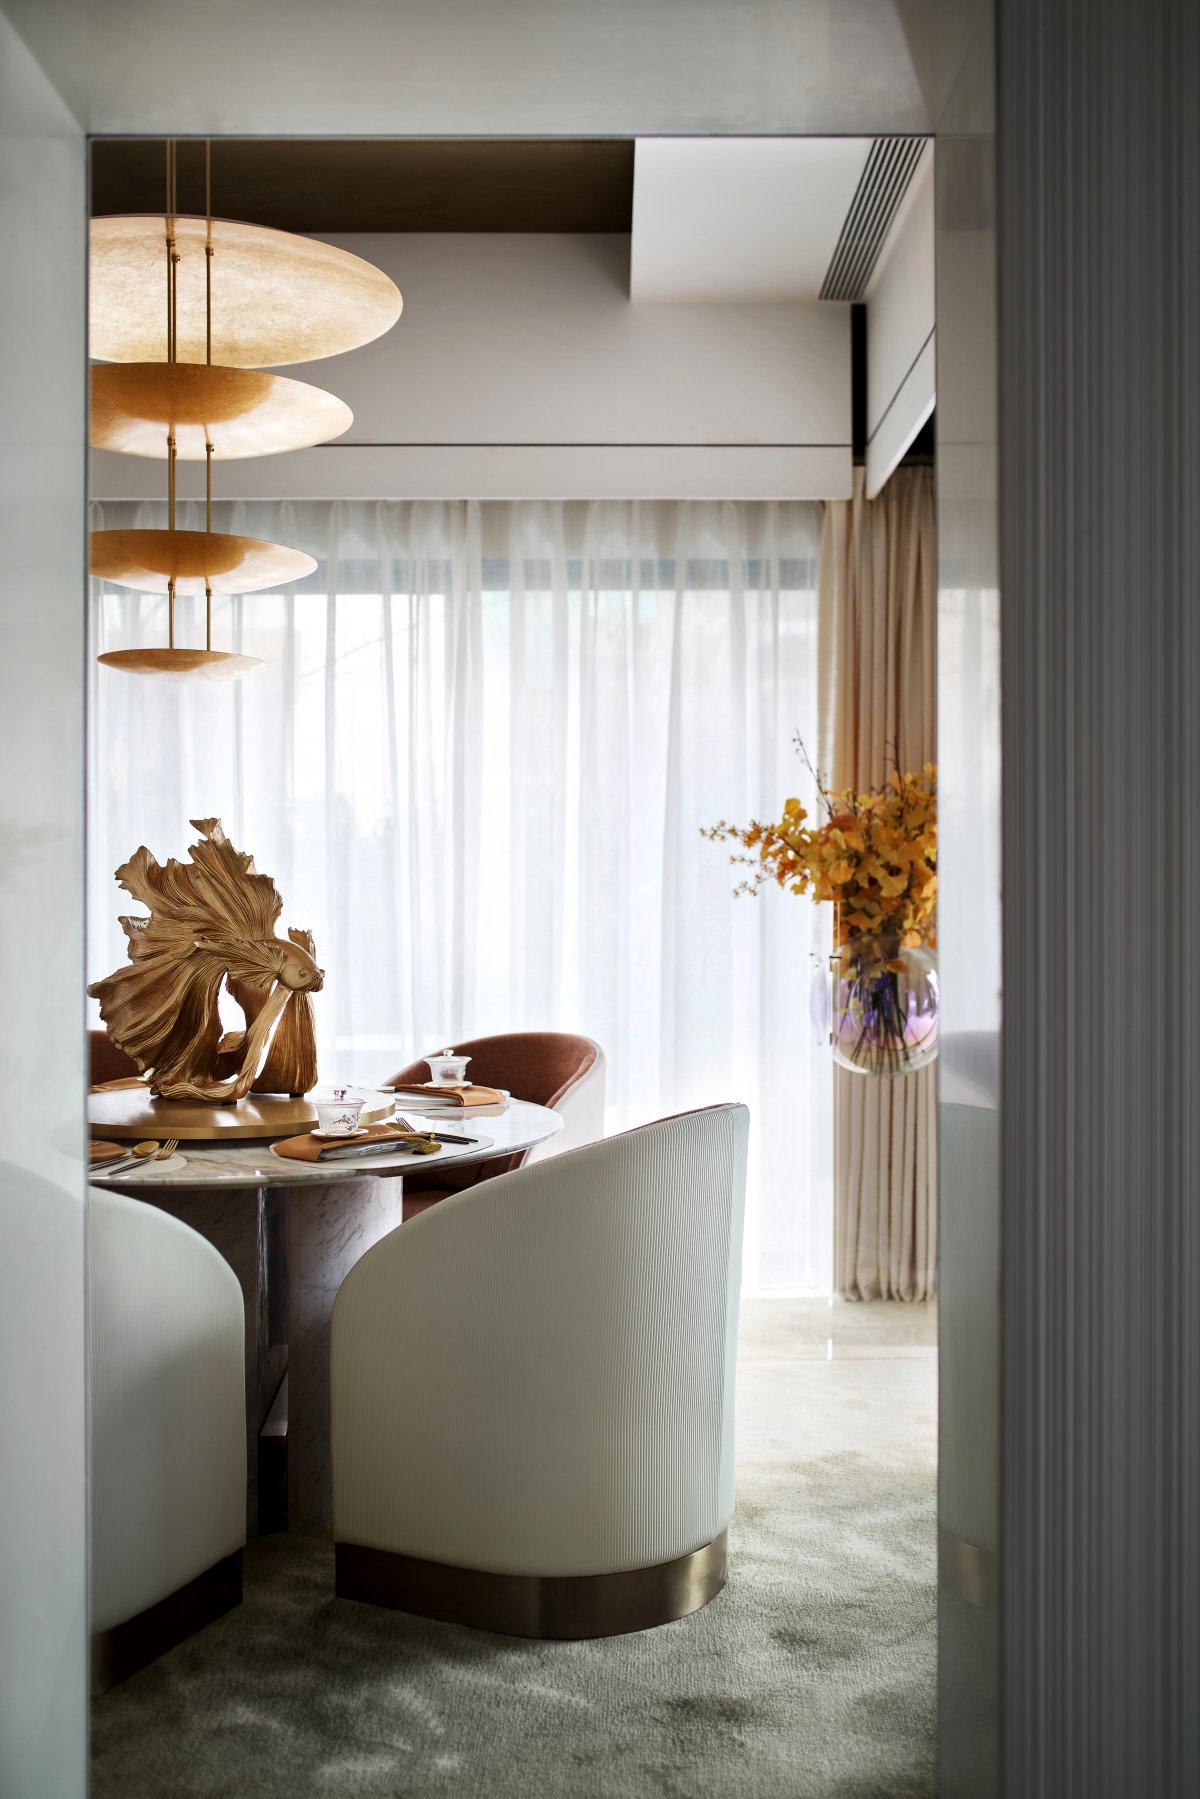 An electrifying moon story told by GBD studio in the luxury villa project - Dining Room